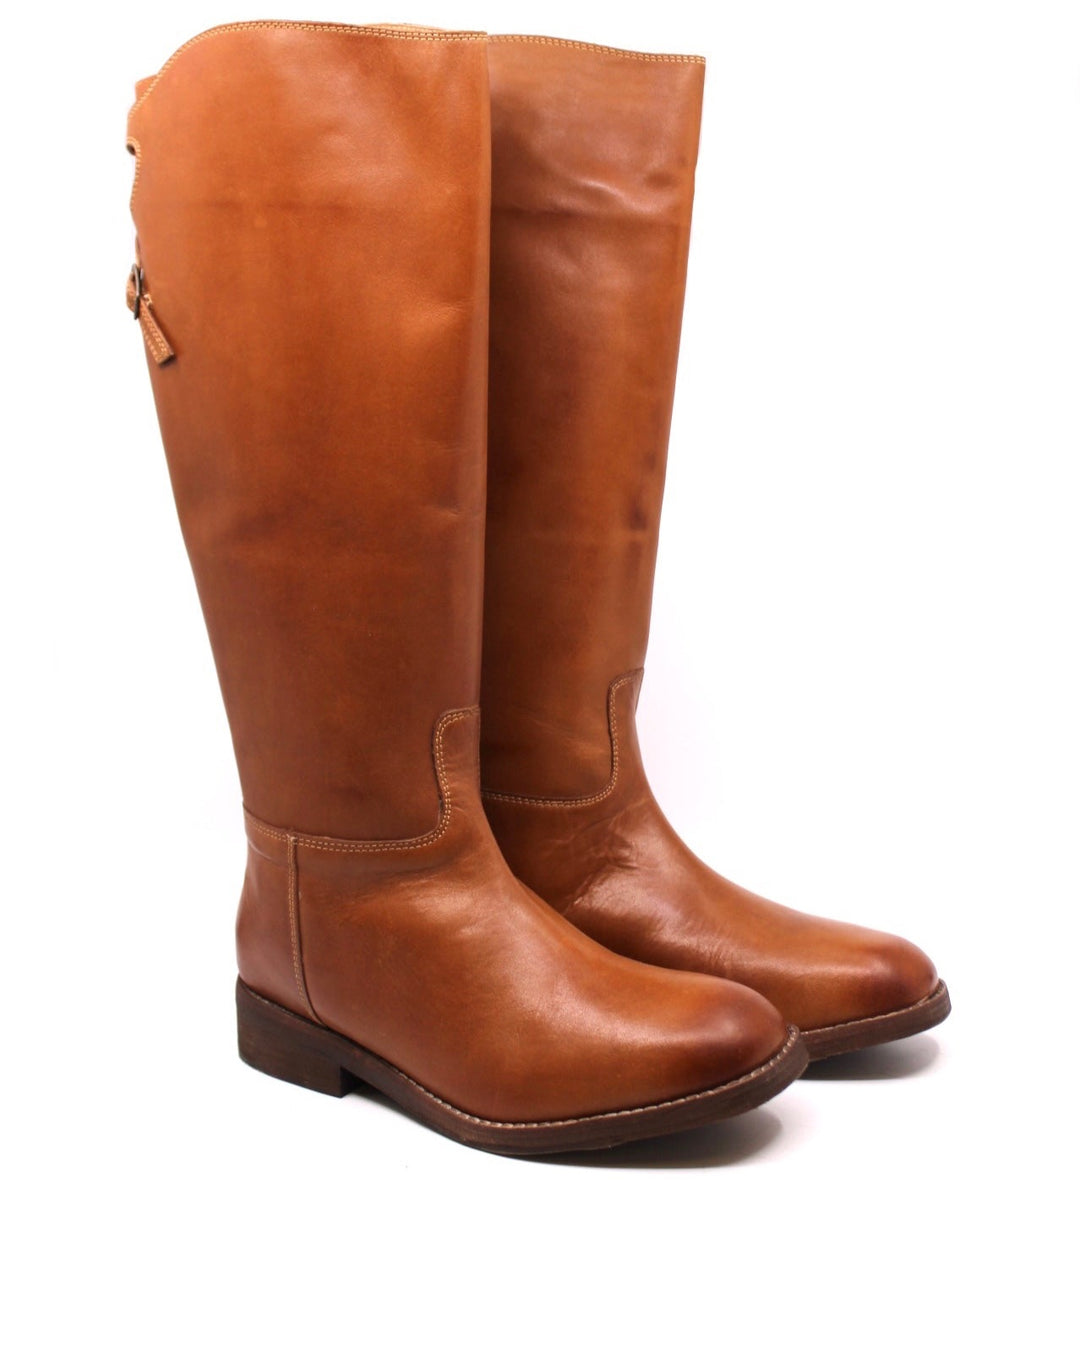 Free People Everly Equestrian Boot Saddle Tan - Dear Lucy